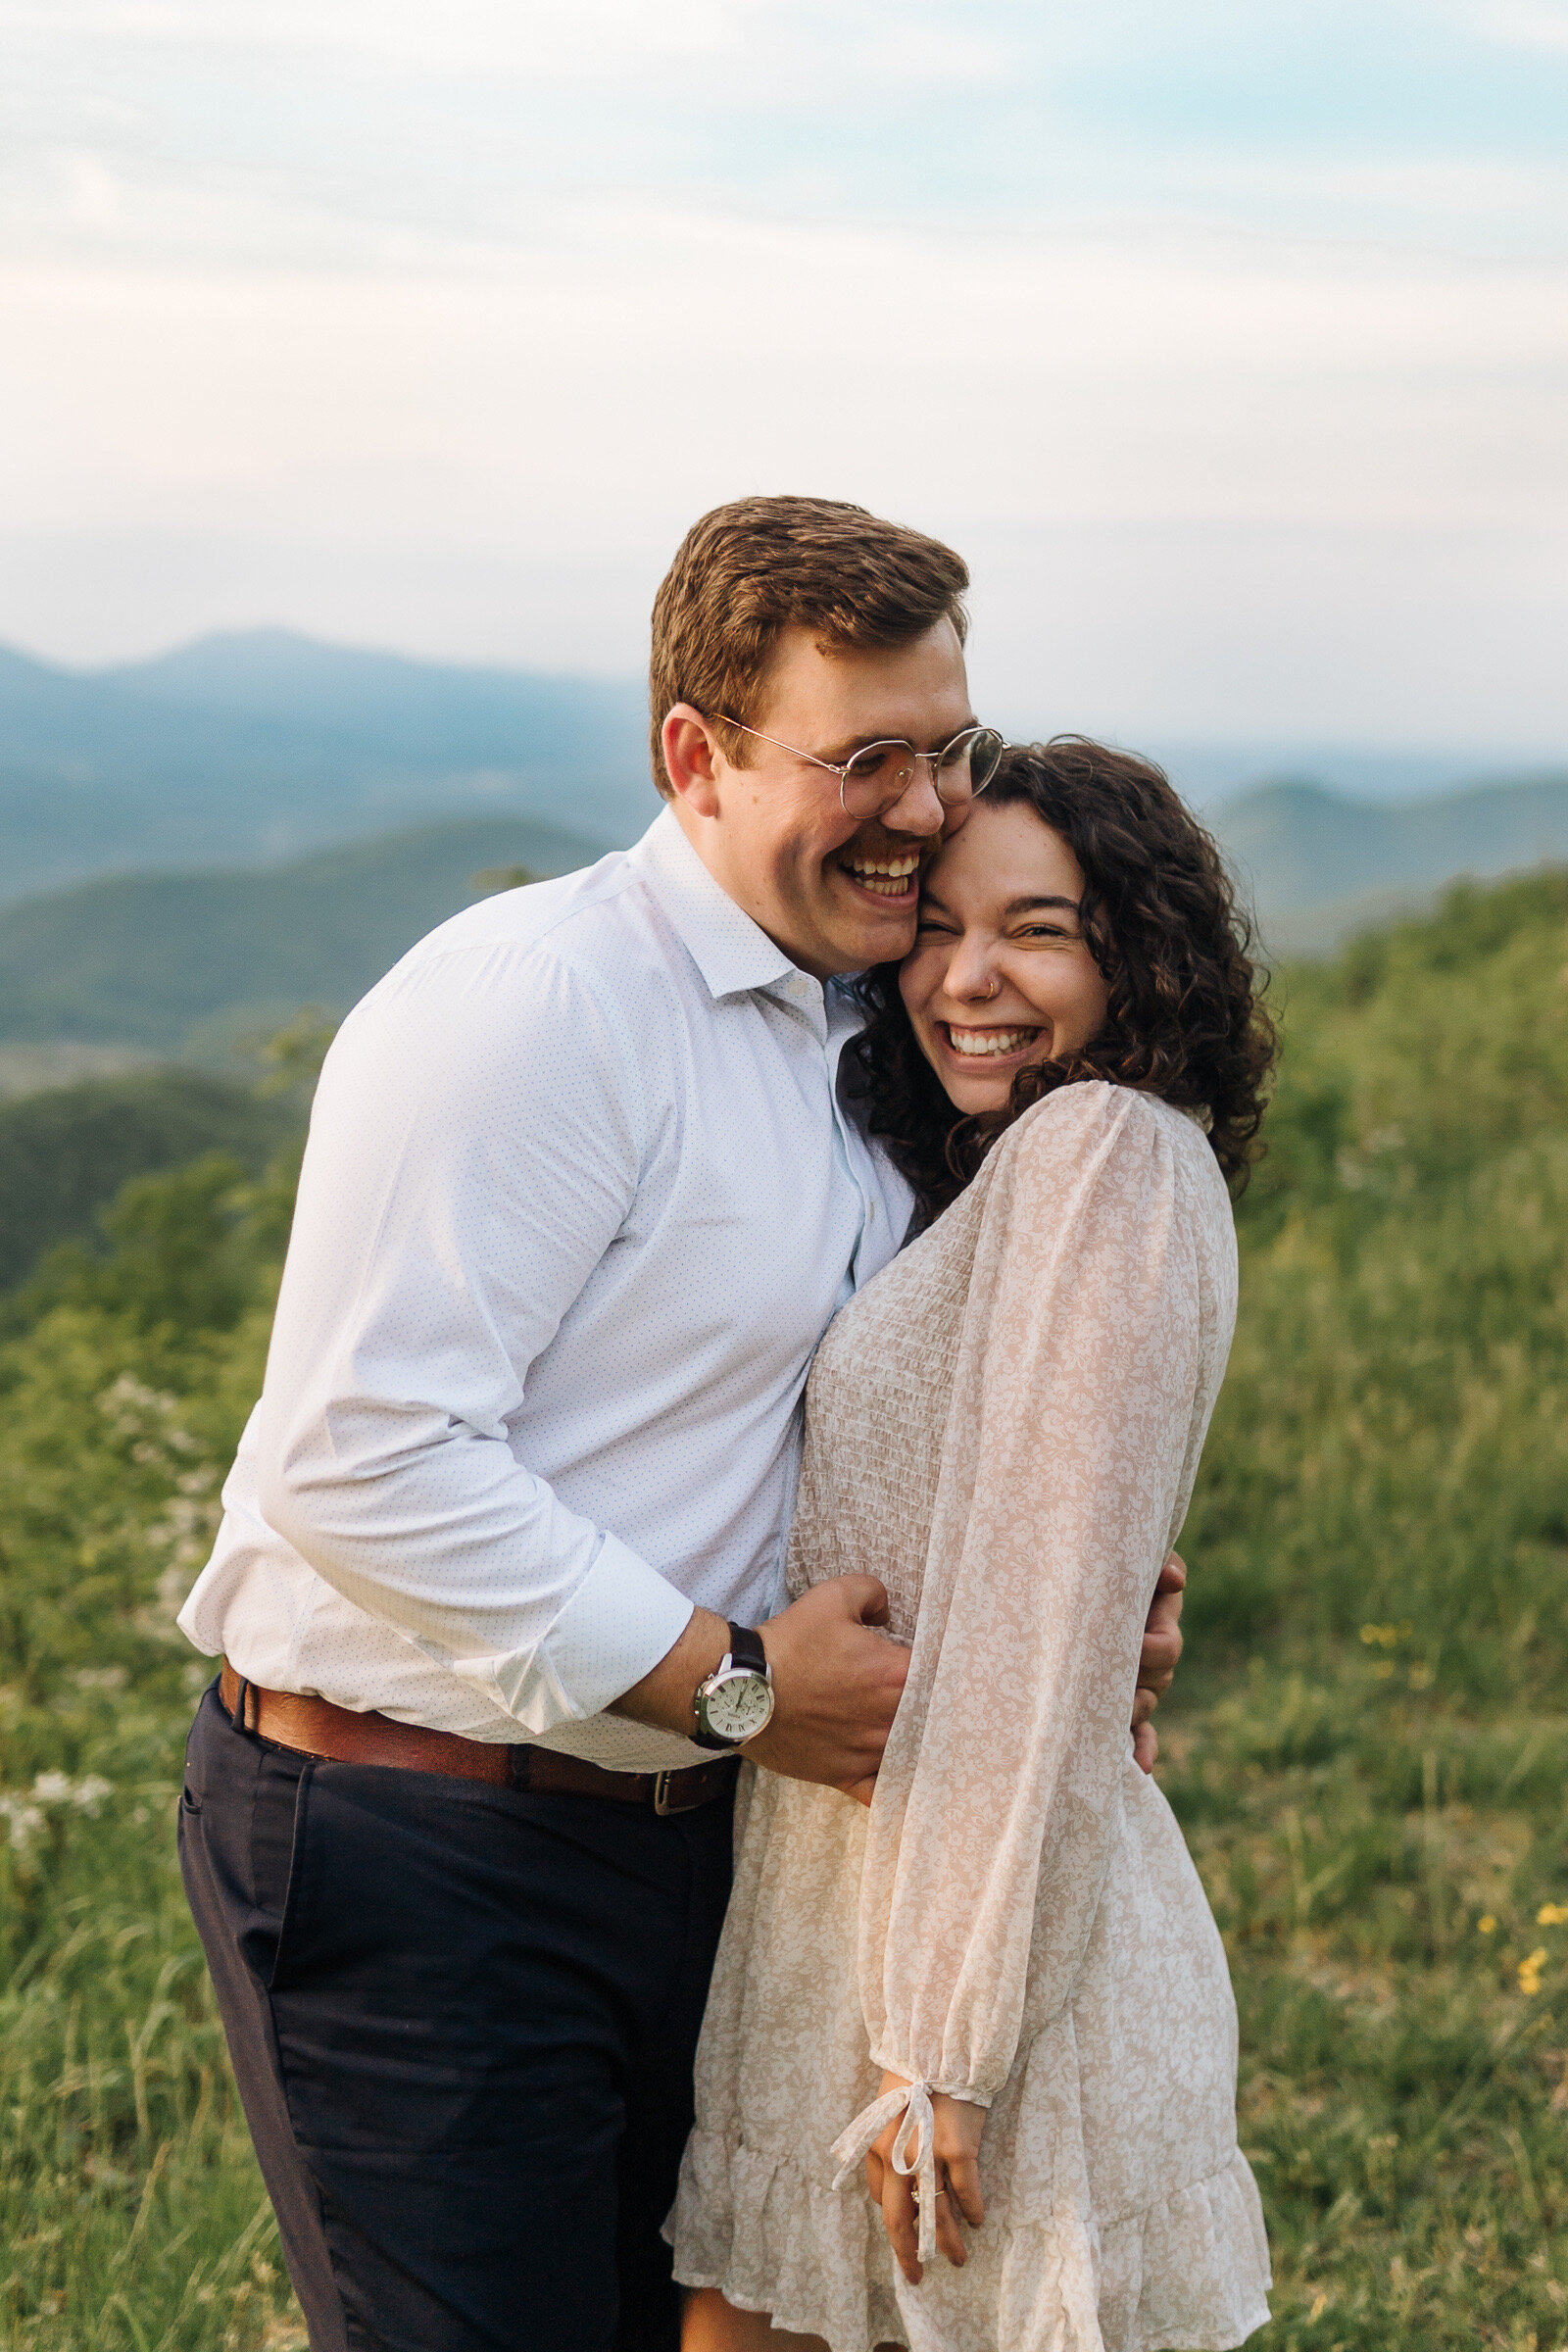 brent-rose-blue-ridge-parkway-peaks-of-otter-blue-engagement-session-by-jonathan-hannah-photography-8.jpg